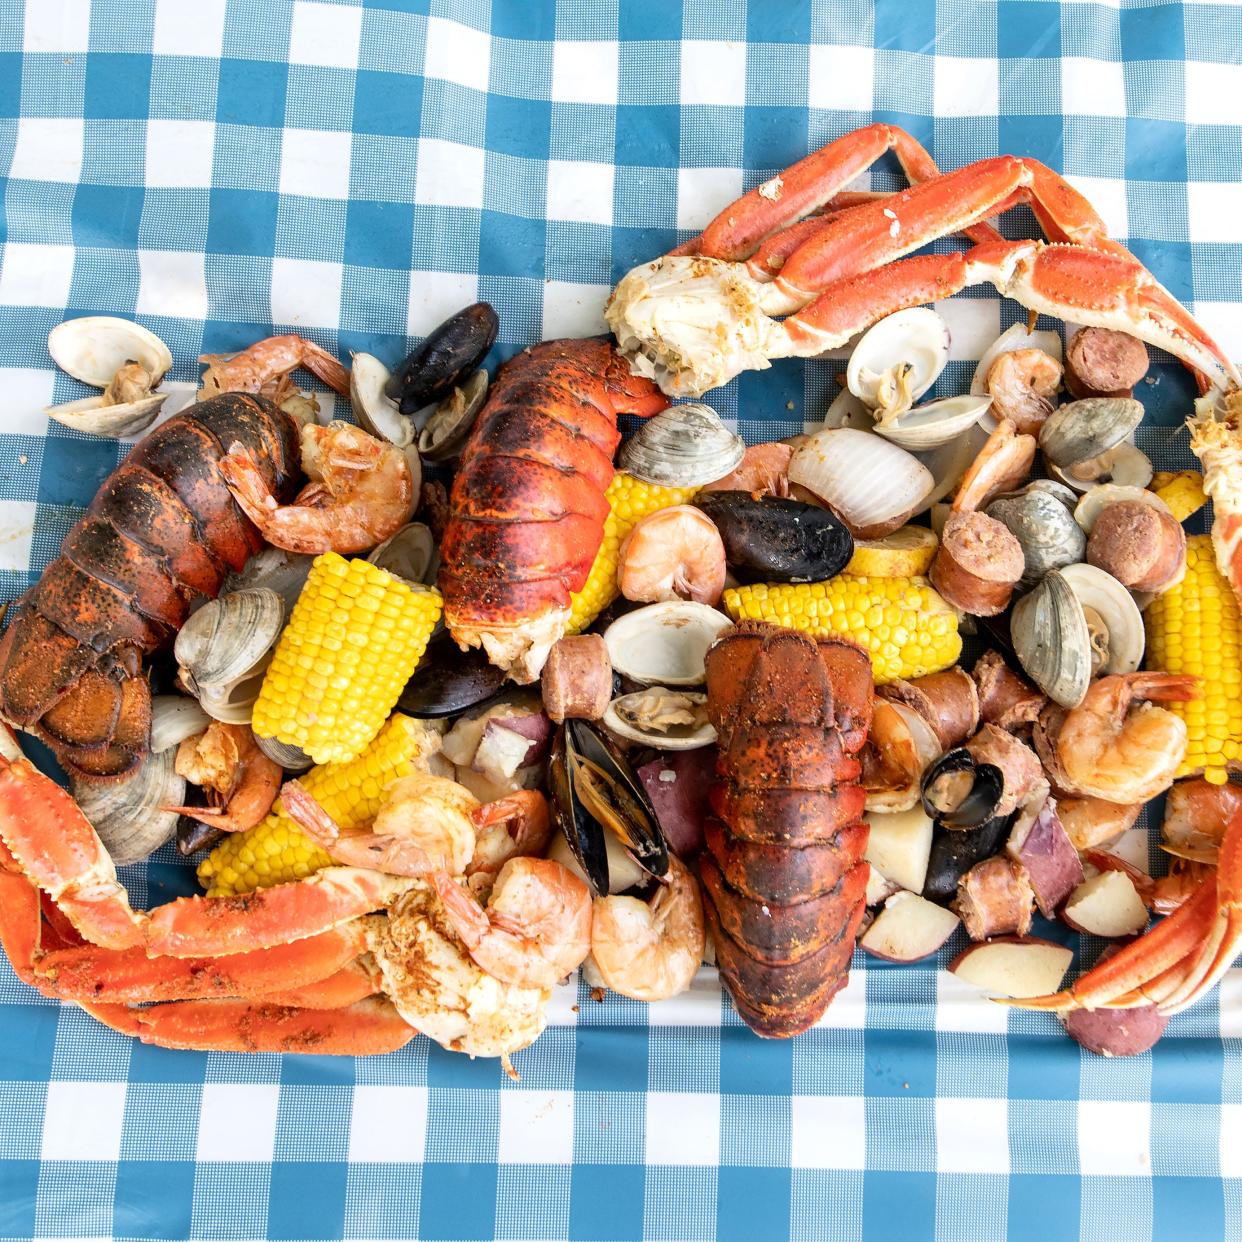 A seafood boil with lobster from Cape Fear Boil Company